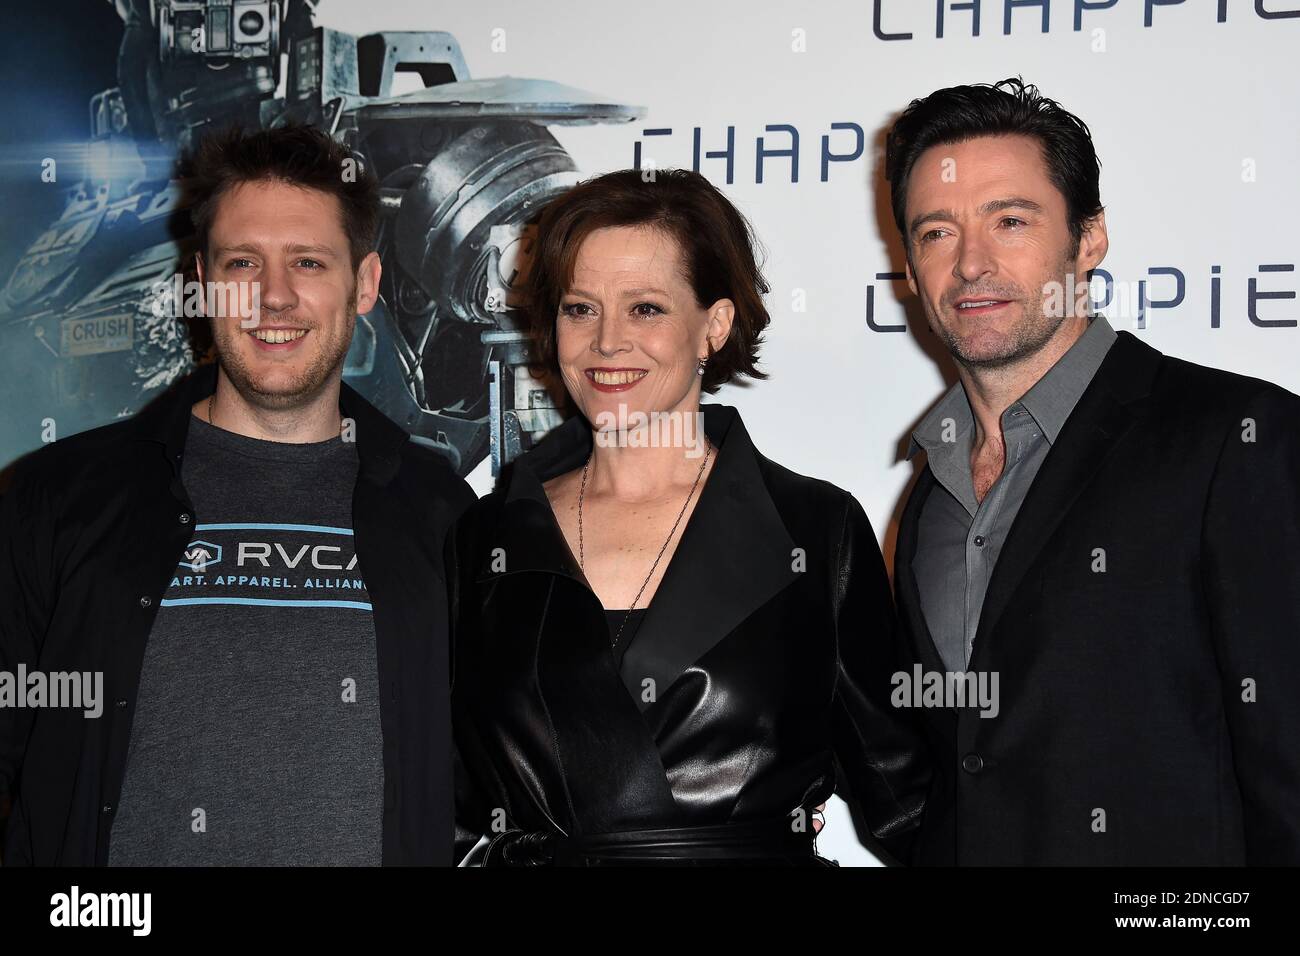 Neill Blomkamp, Sigourney Weaver and Hugh Jackman pose at a photocall for the film Chappie at the Hotel Bristol in Paris, France, on February 26, 2015. Photo by Nicolas Briquet/ABACAPRESS.COM Stock Photo